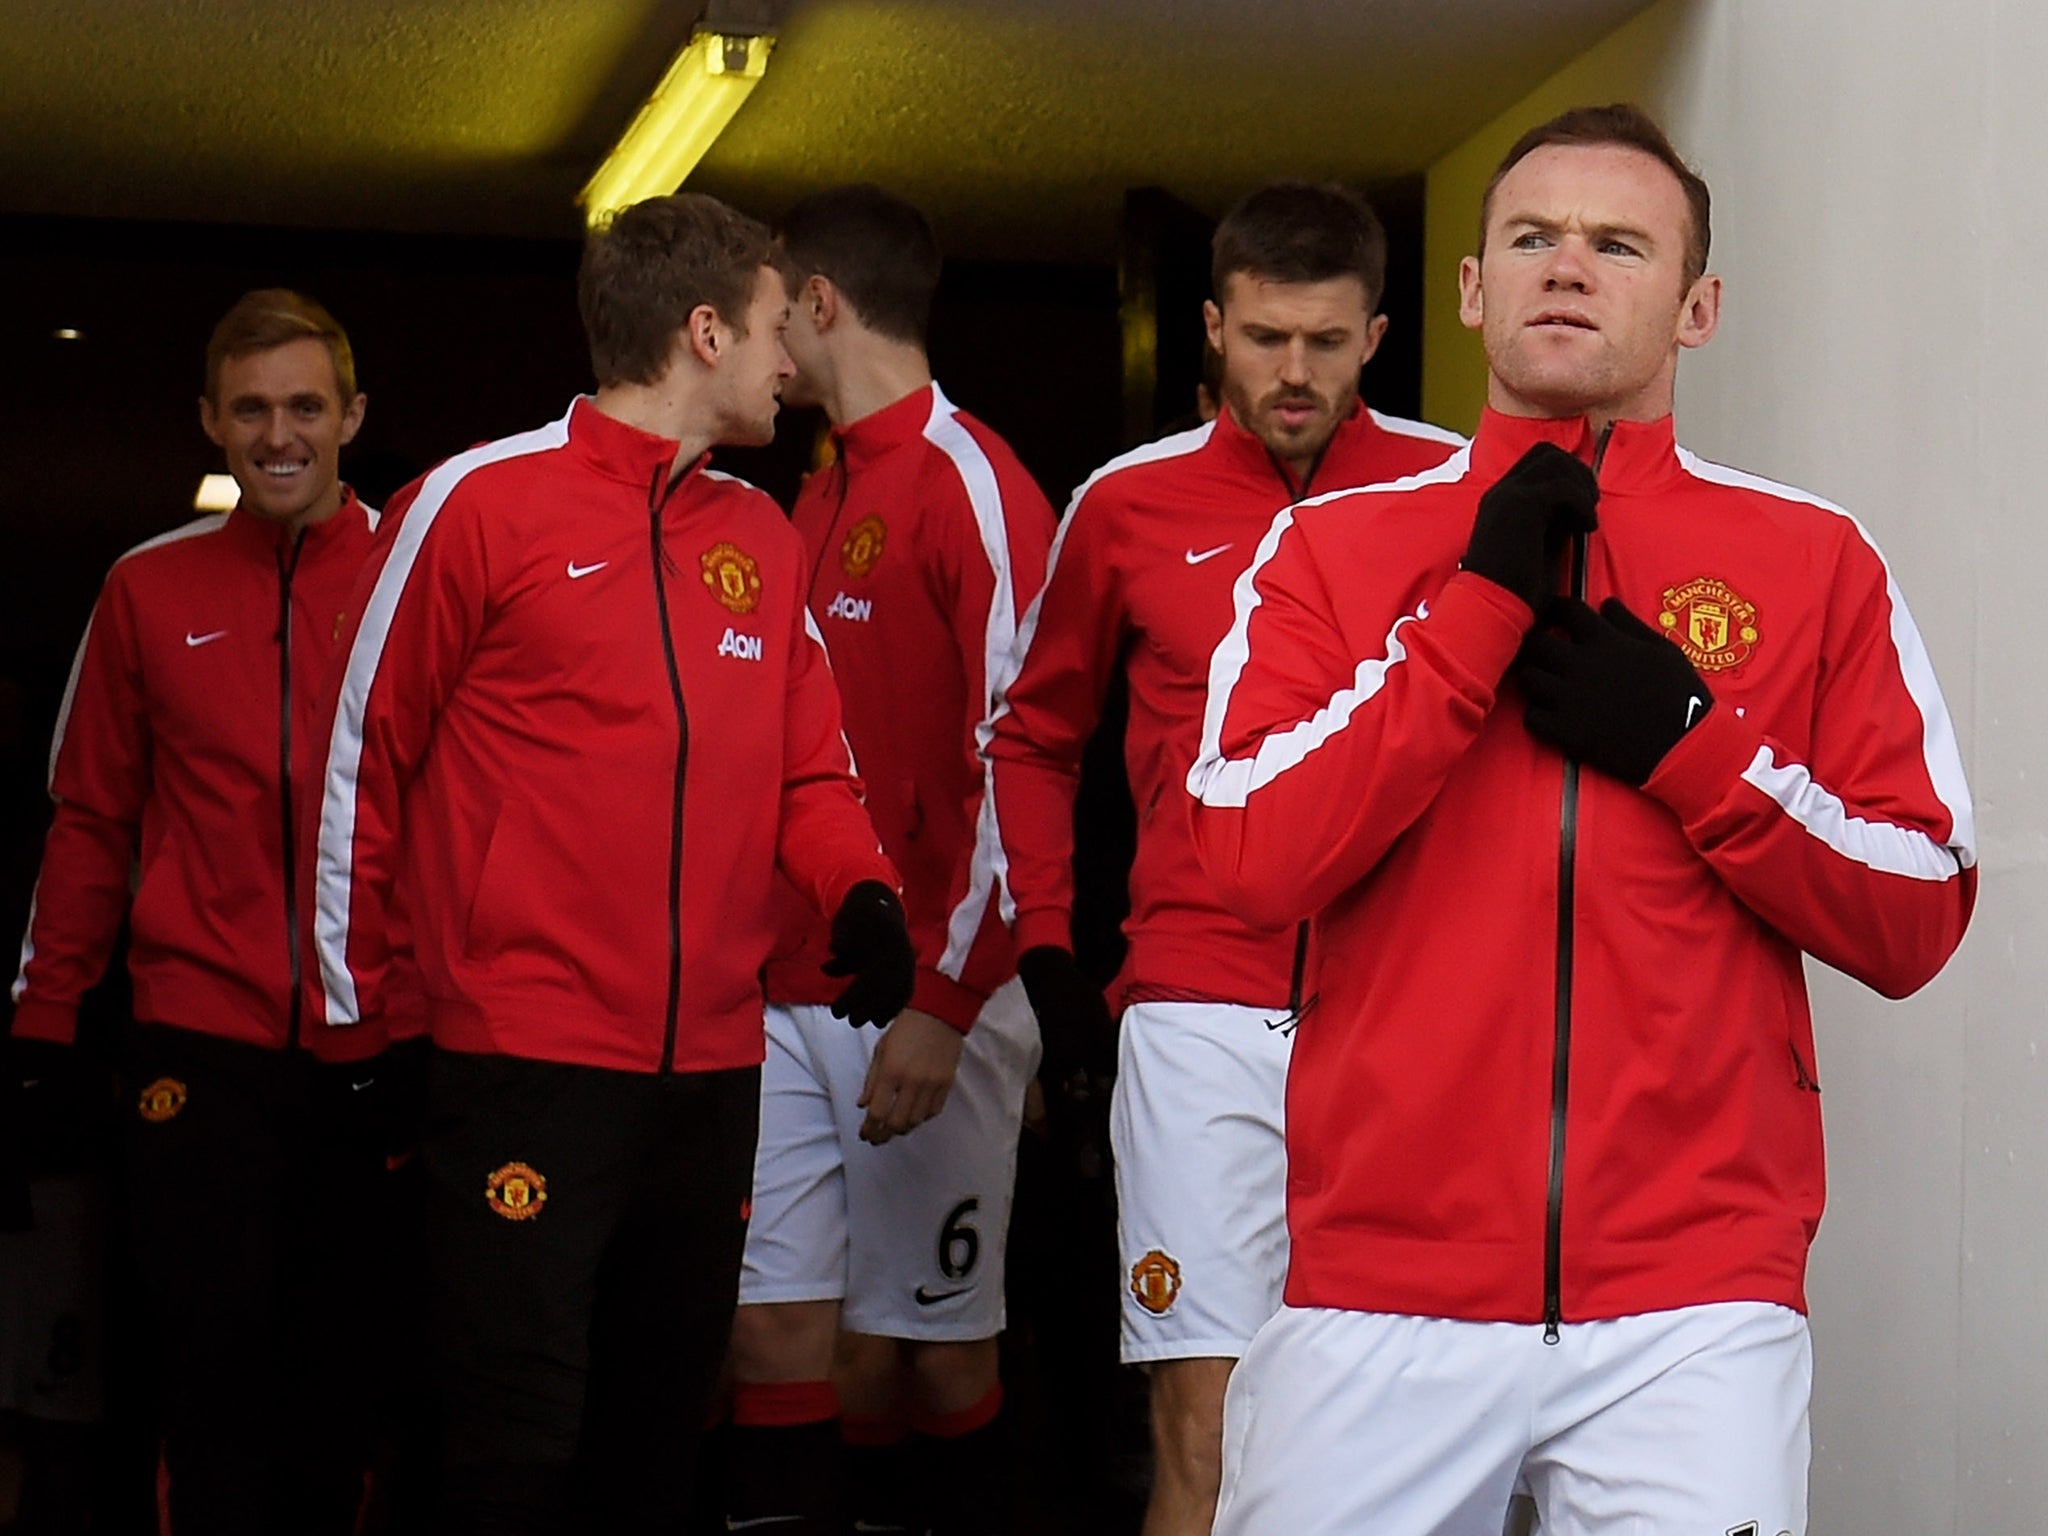 Wayne Rooney with his Manchester United team-mates